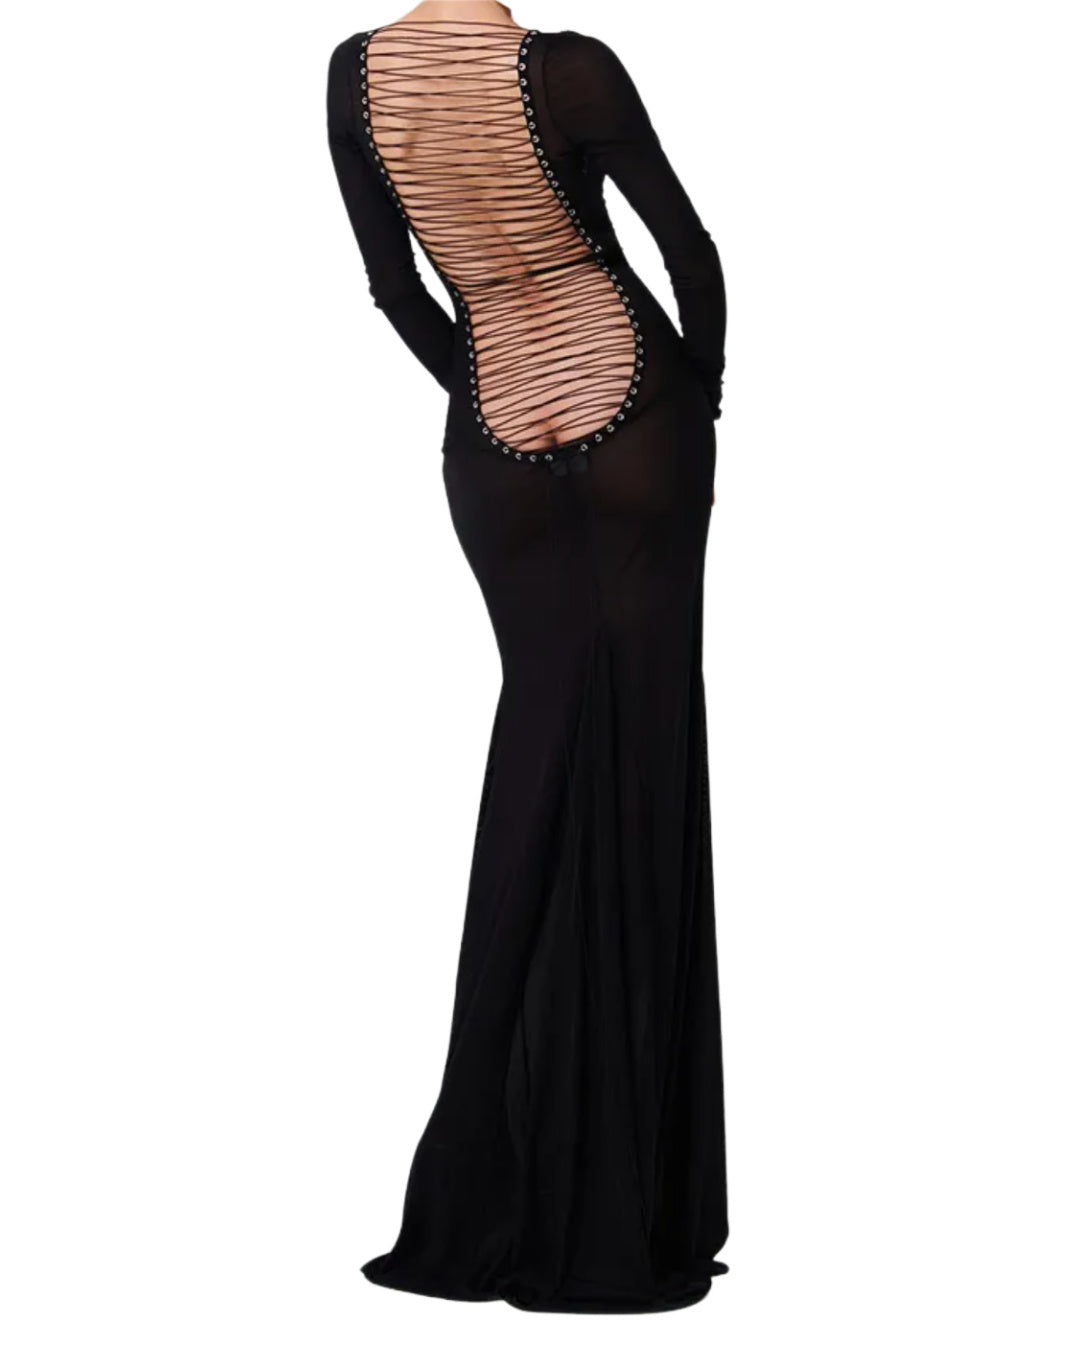 Cello- the Stringed Back Sheer Evening Dress Red or Black